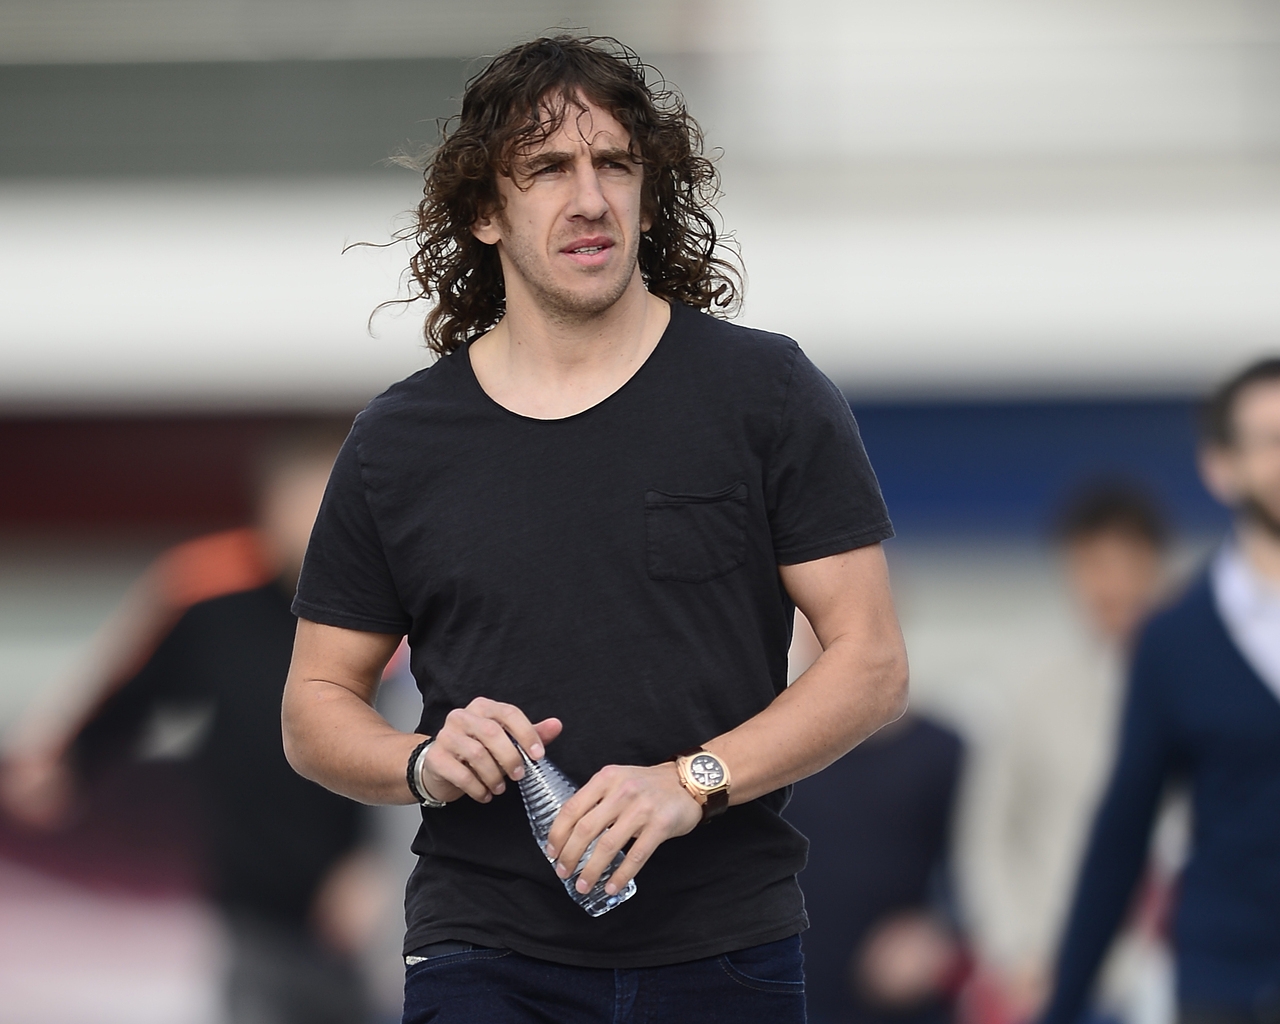 Carles Puyol for 1280 x 1024 resolution